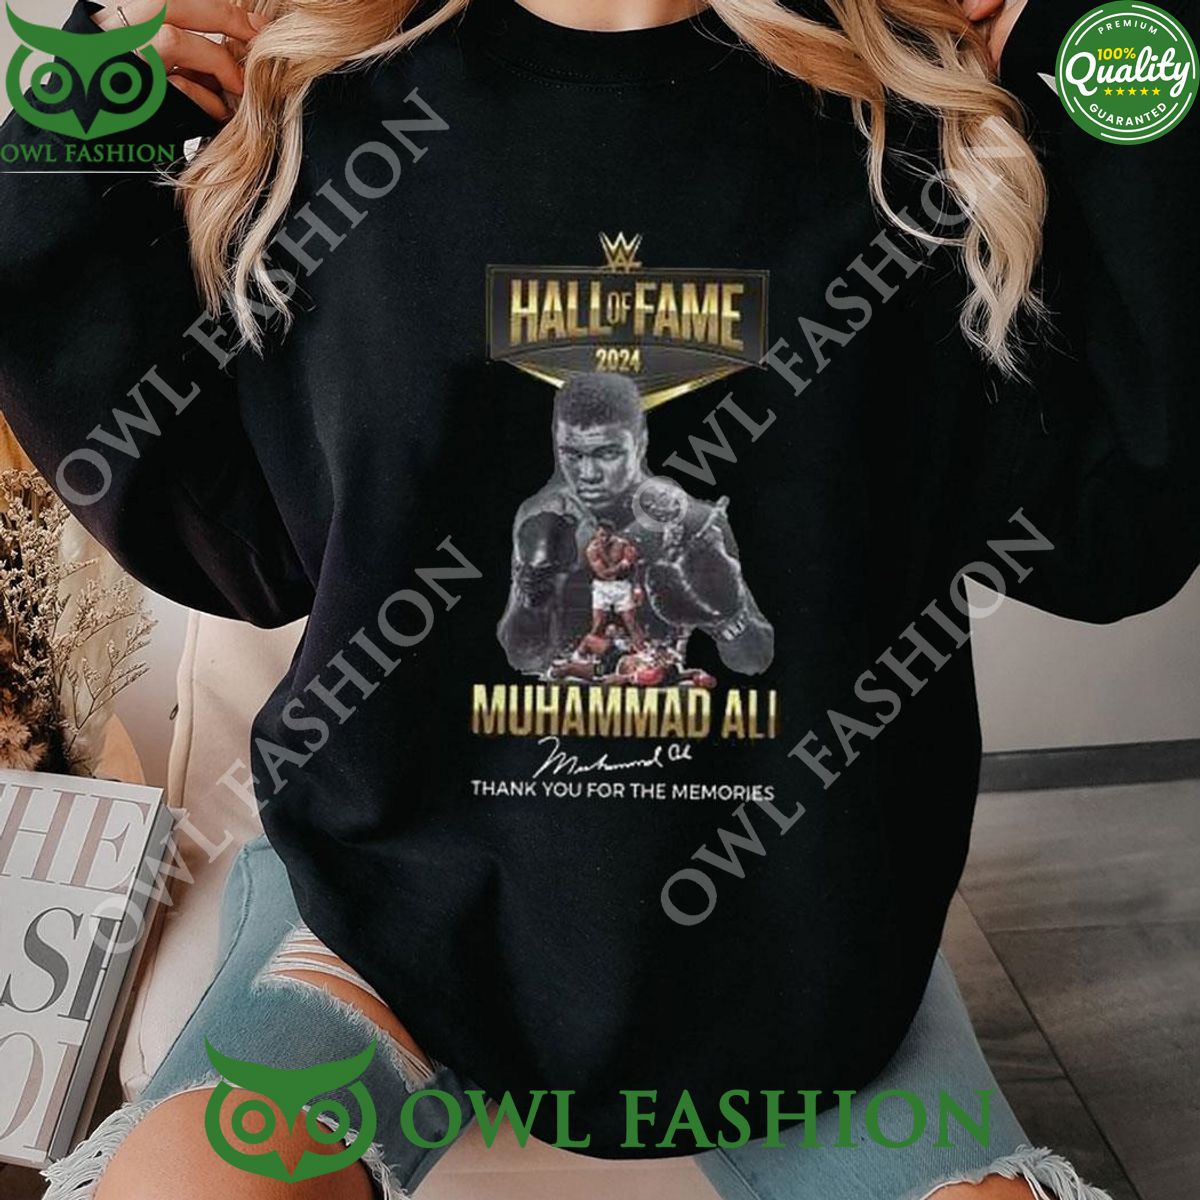 2024 thank you for the memories hall of fame muhammad ali t shirt 1 9wduw.jpg